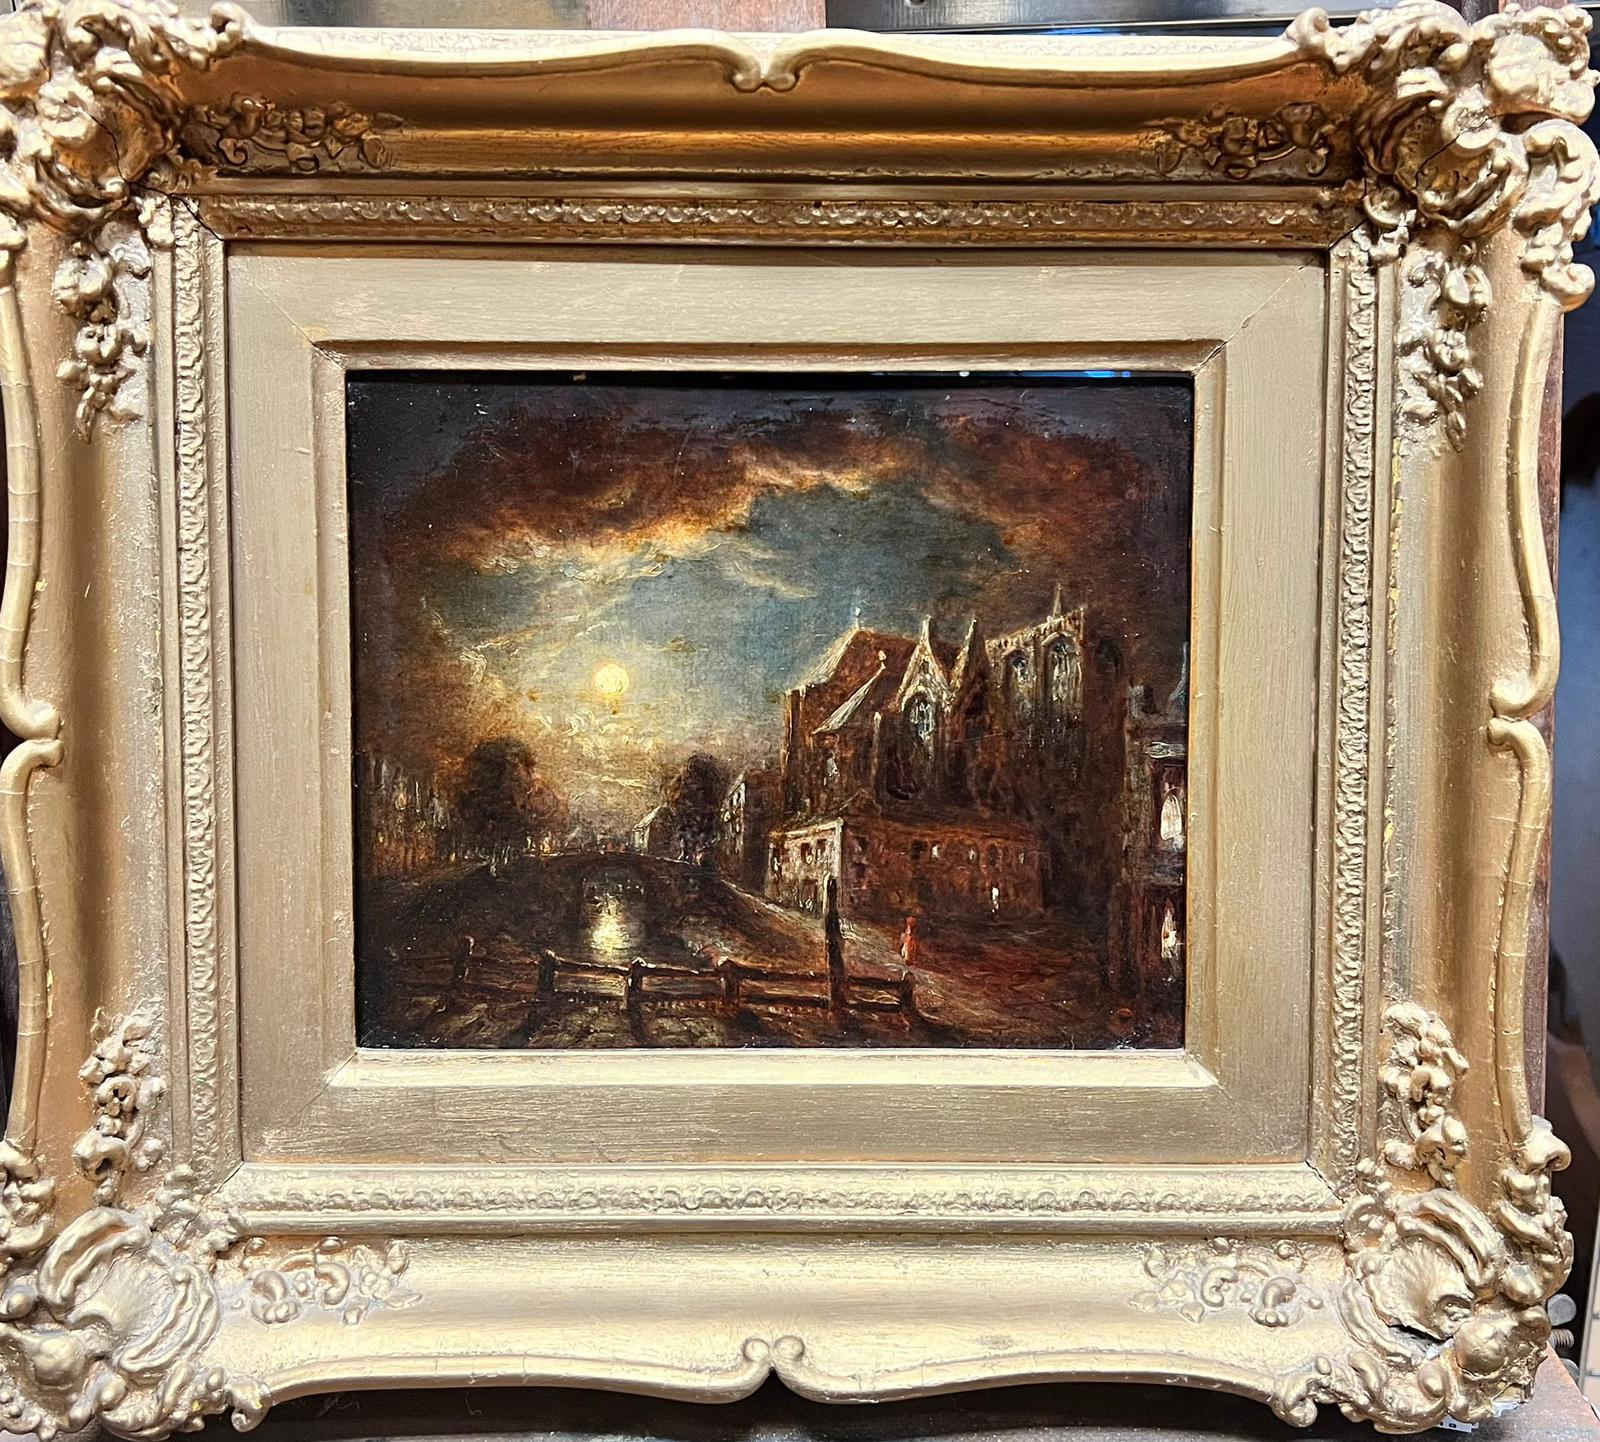 Antique Dutch School Moonlit Canal Scene With the Oute Kerk Amsterdram - Painting by 19th century Dutch School